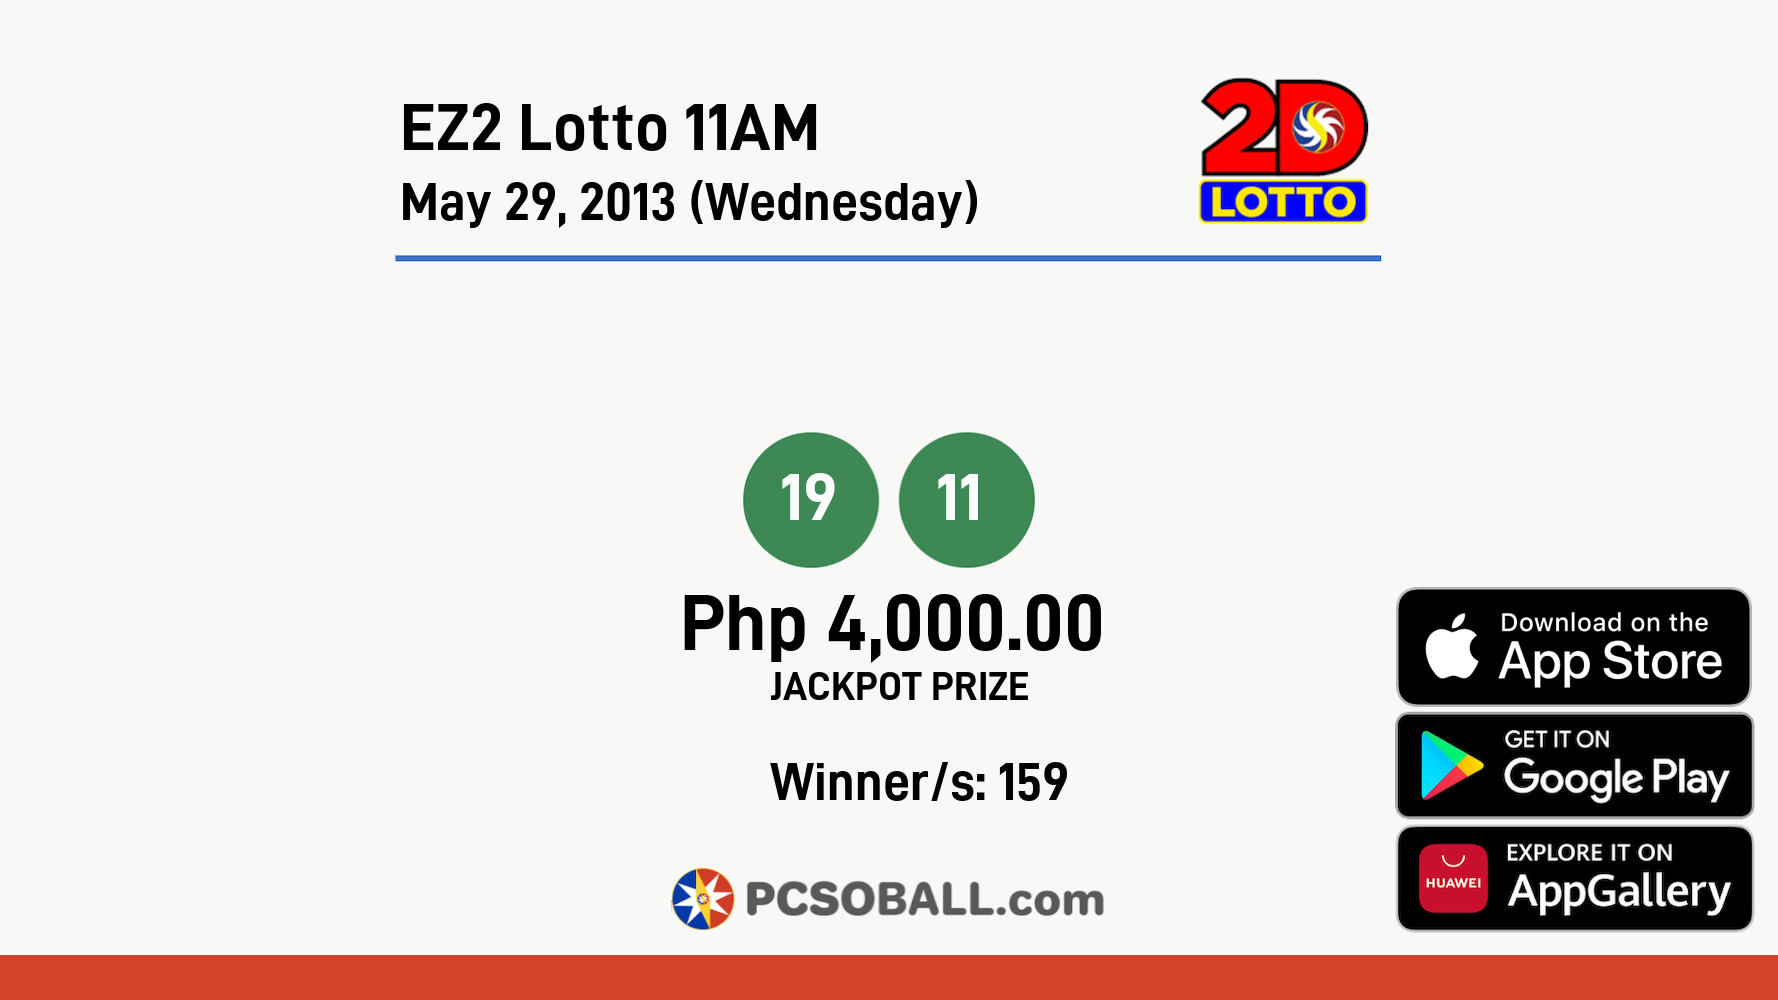 EZ2 Lotto 11AM May 29, 2013 (Wednesday) Result